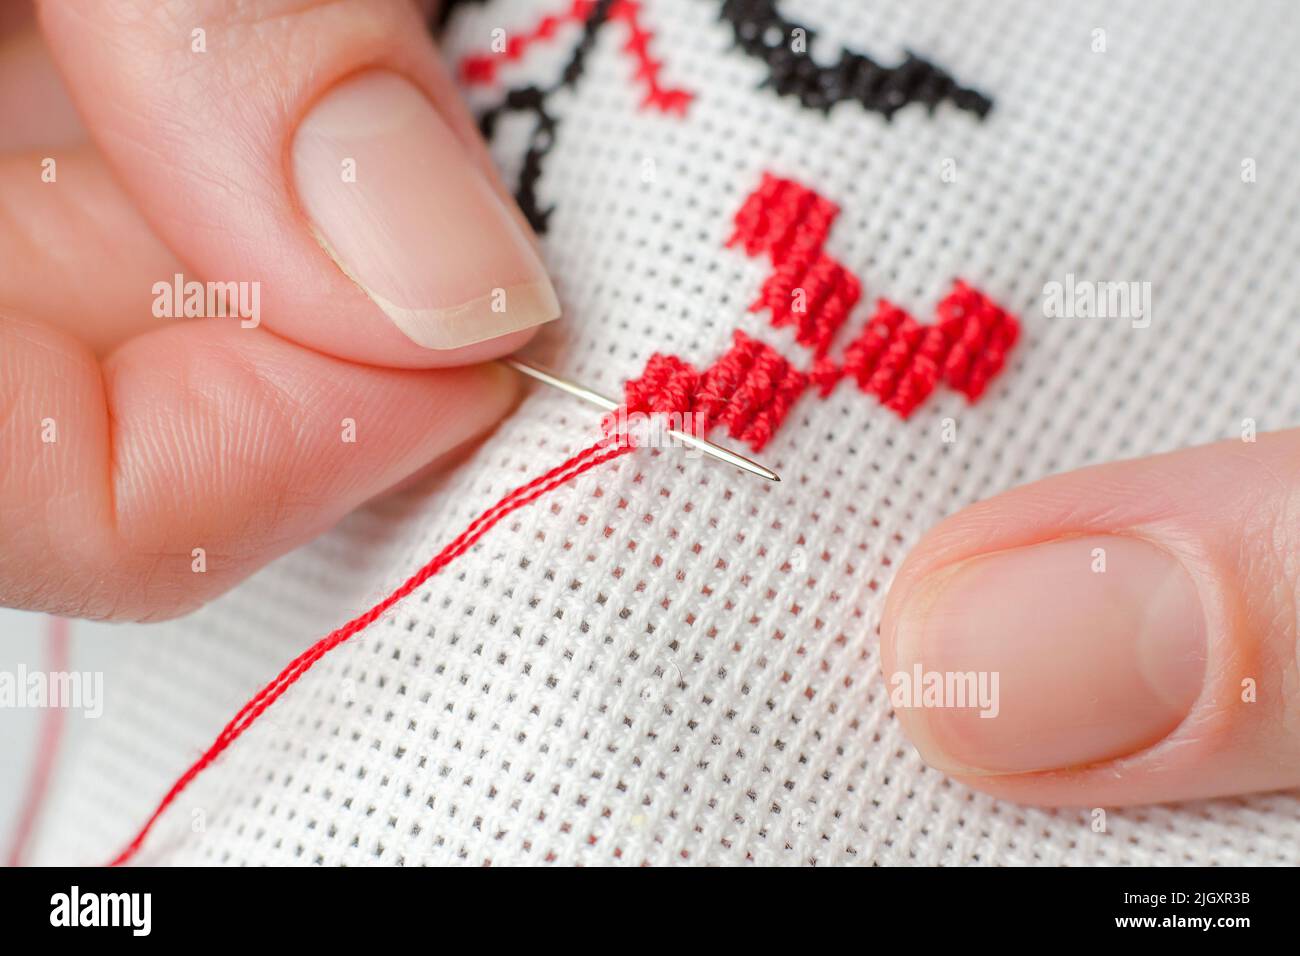 A woman embroiders the national symbols of Ukraine with a cross. Close-up of female hands cross-stitching on white canvas. Stock Photo